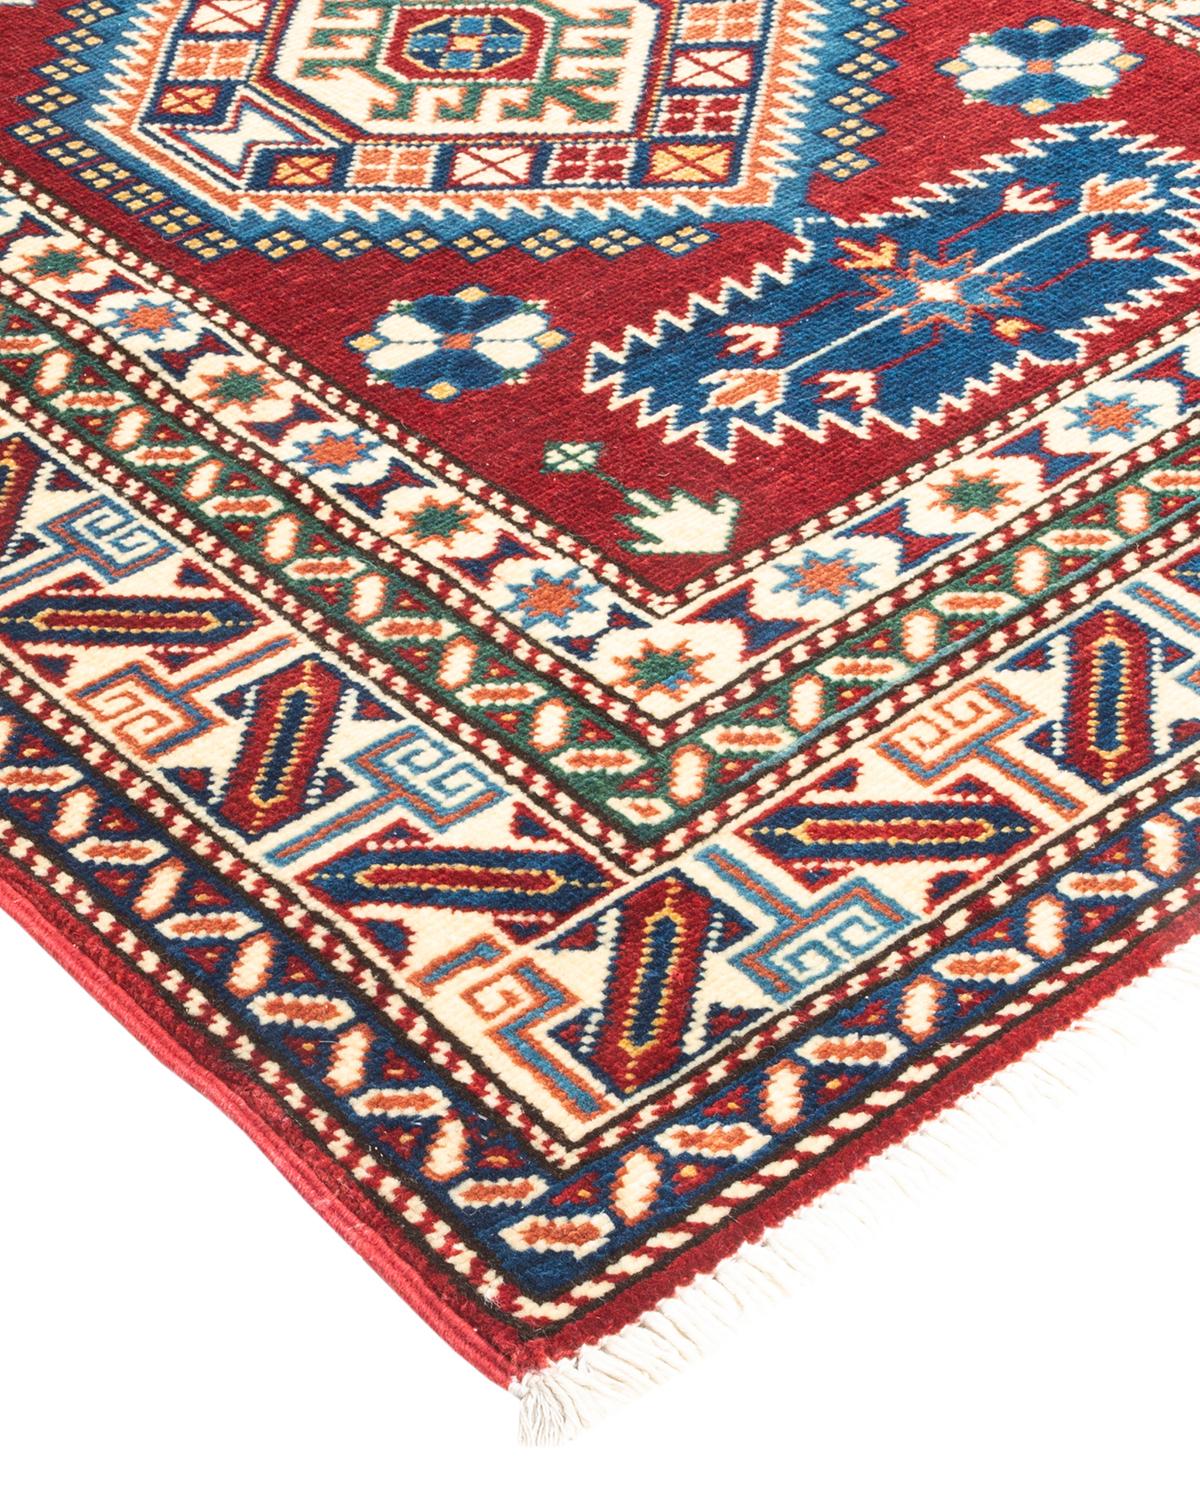 The rich textile tradition of western Africa inspired the Tribal collection of hand-knotted rugs. Incorporating a medley of geometric motifs, in palettes ranging from earthy to vivacious, these rugs bring a sense of energy as well as plush texture